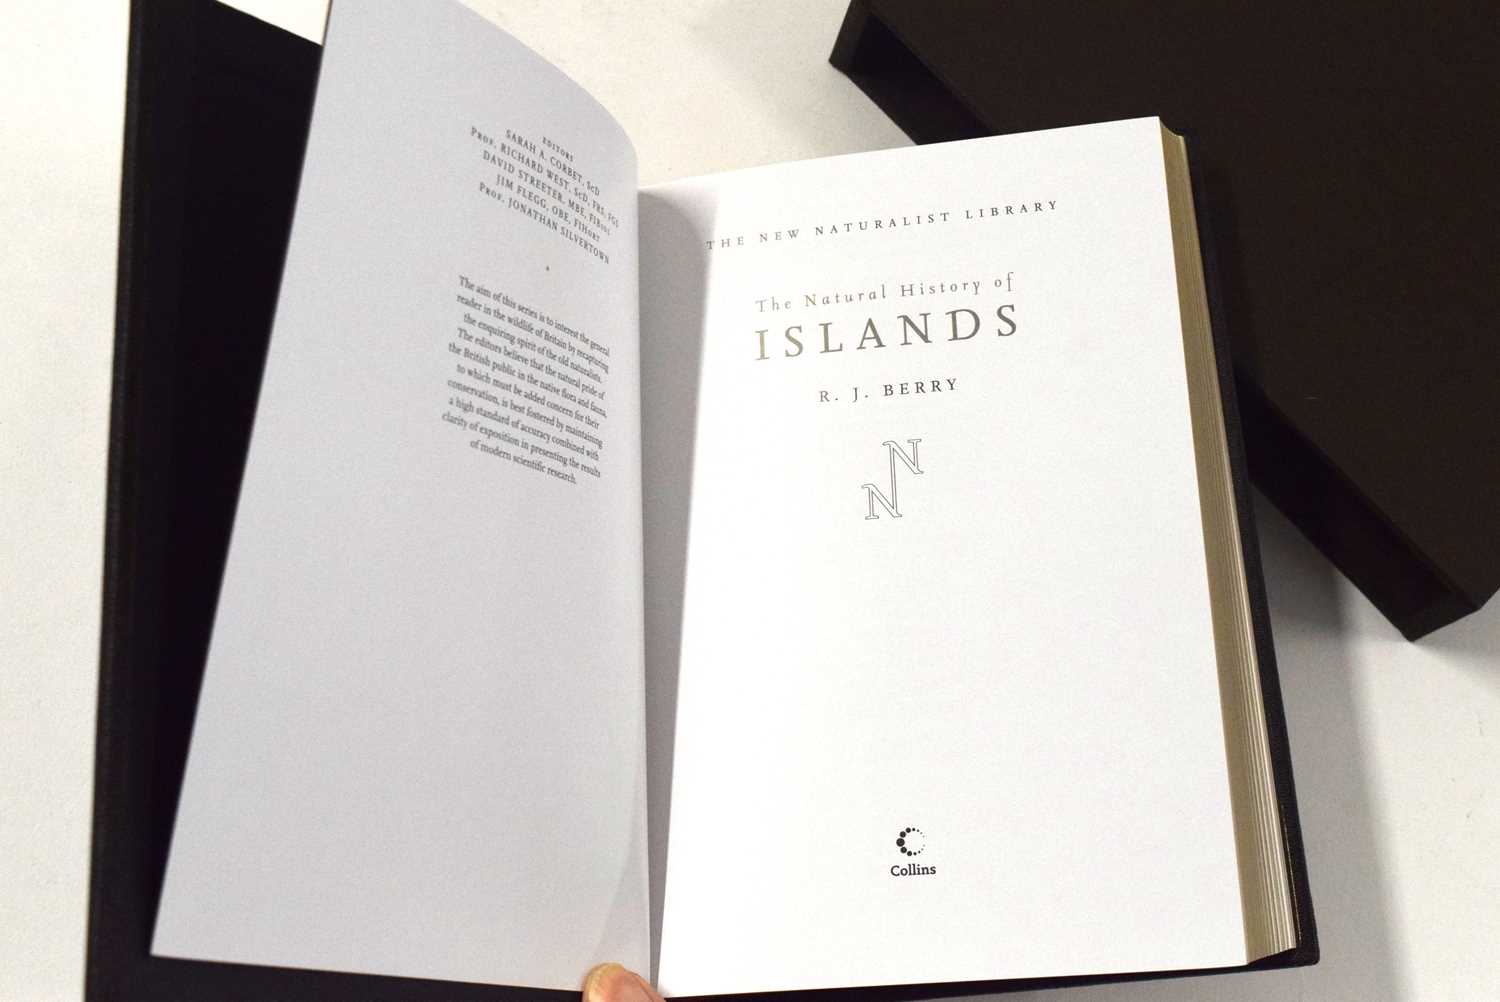 Ornithological book interest: signed Leather bound edition New Naturalist 'Islands' by R.J.Berry - Image 4 of 6